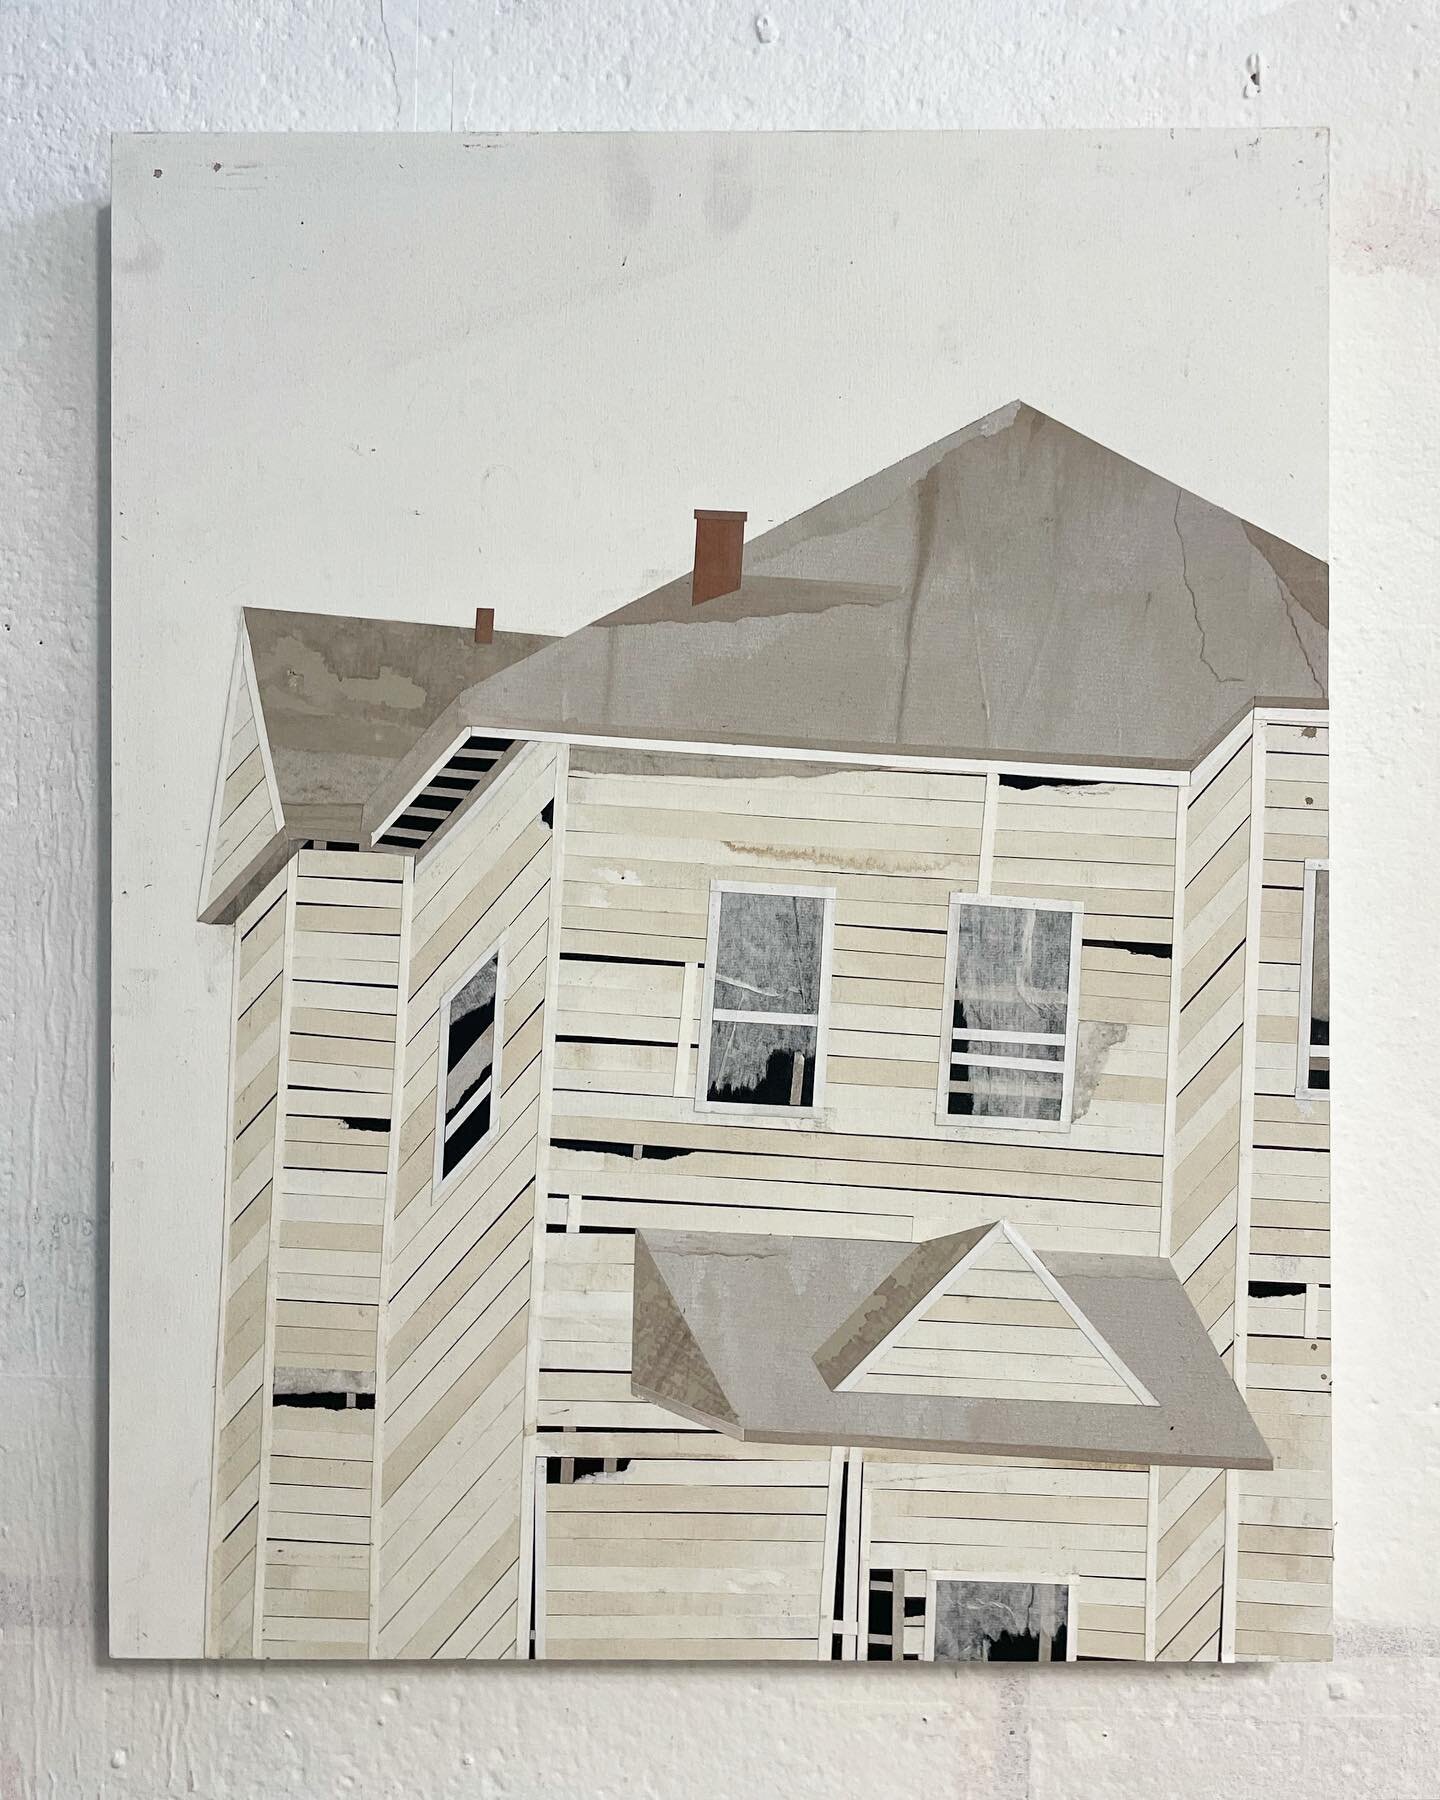 Small transformations
.
.
.
.
.
.
.
#collageartist #pittsburghartist #oldhouse #archdaily #archlovers #kolaż #kolaj #collagecollective #collagear